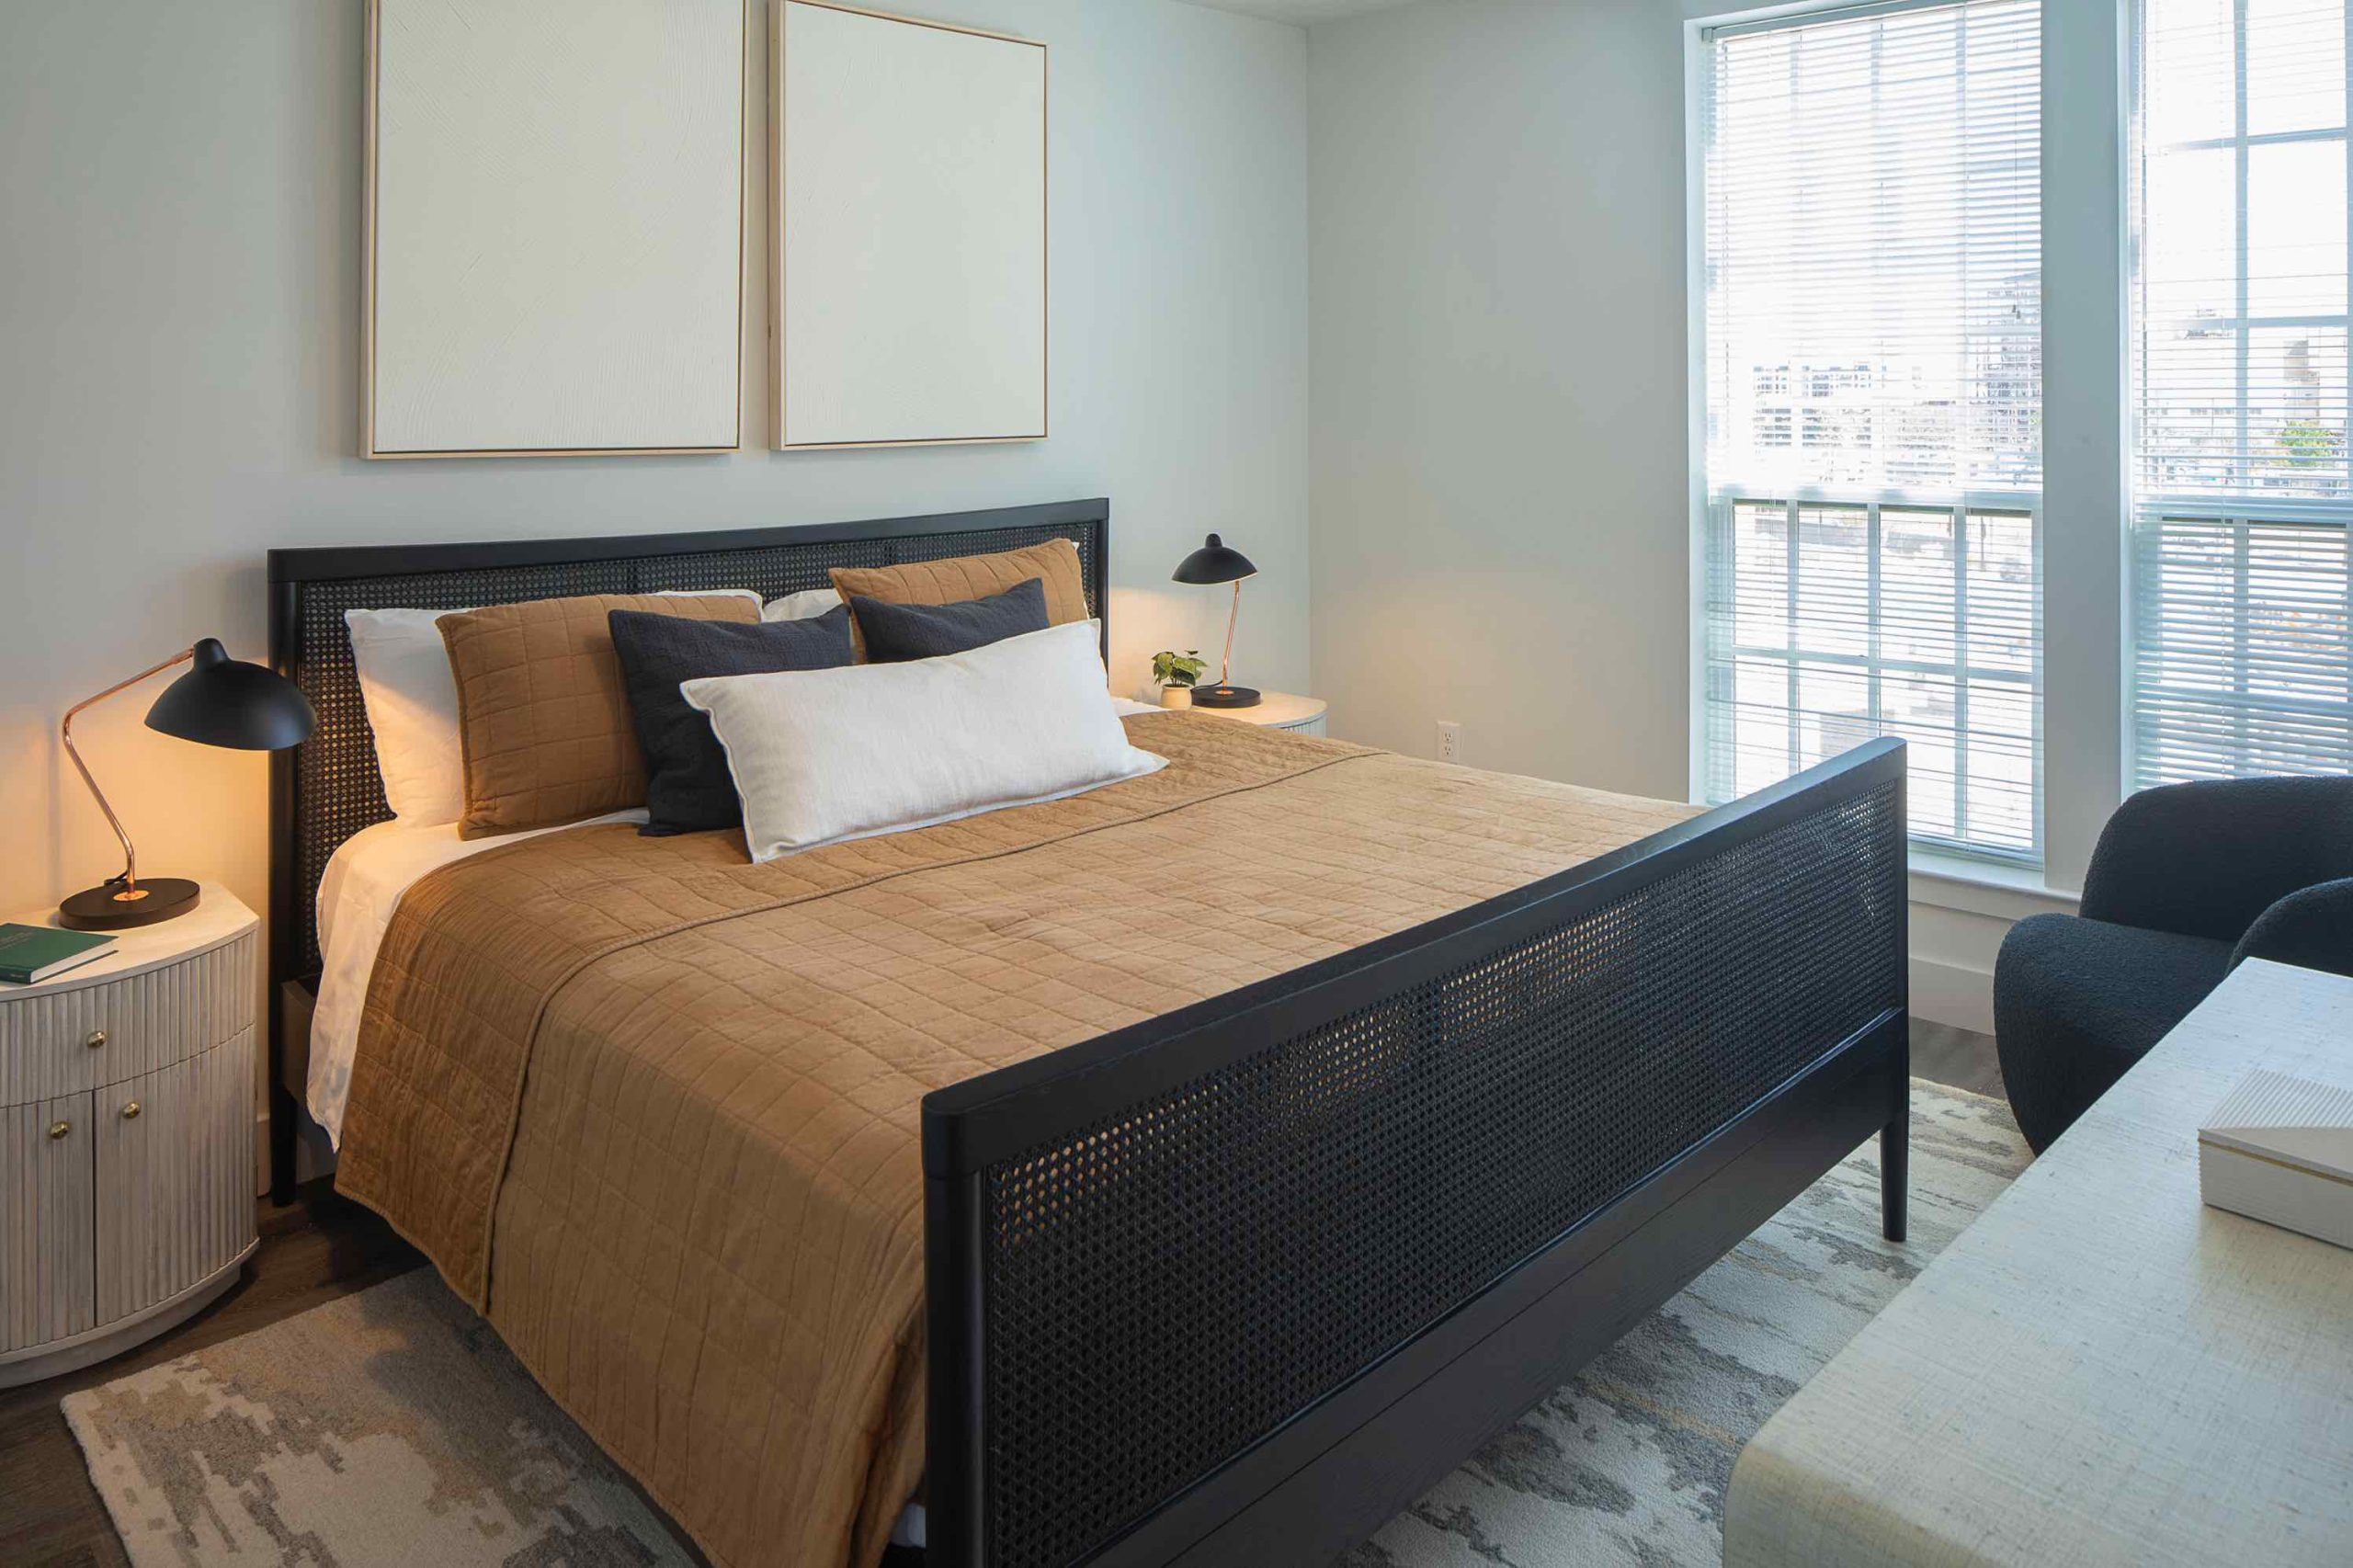 Bedroom with a comfy bed, a nightstand, a window letting in natural light. Inside our luxury apartments at 250 Mission.